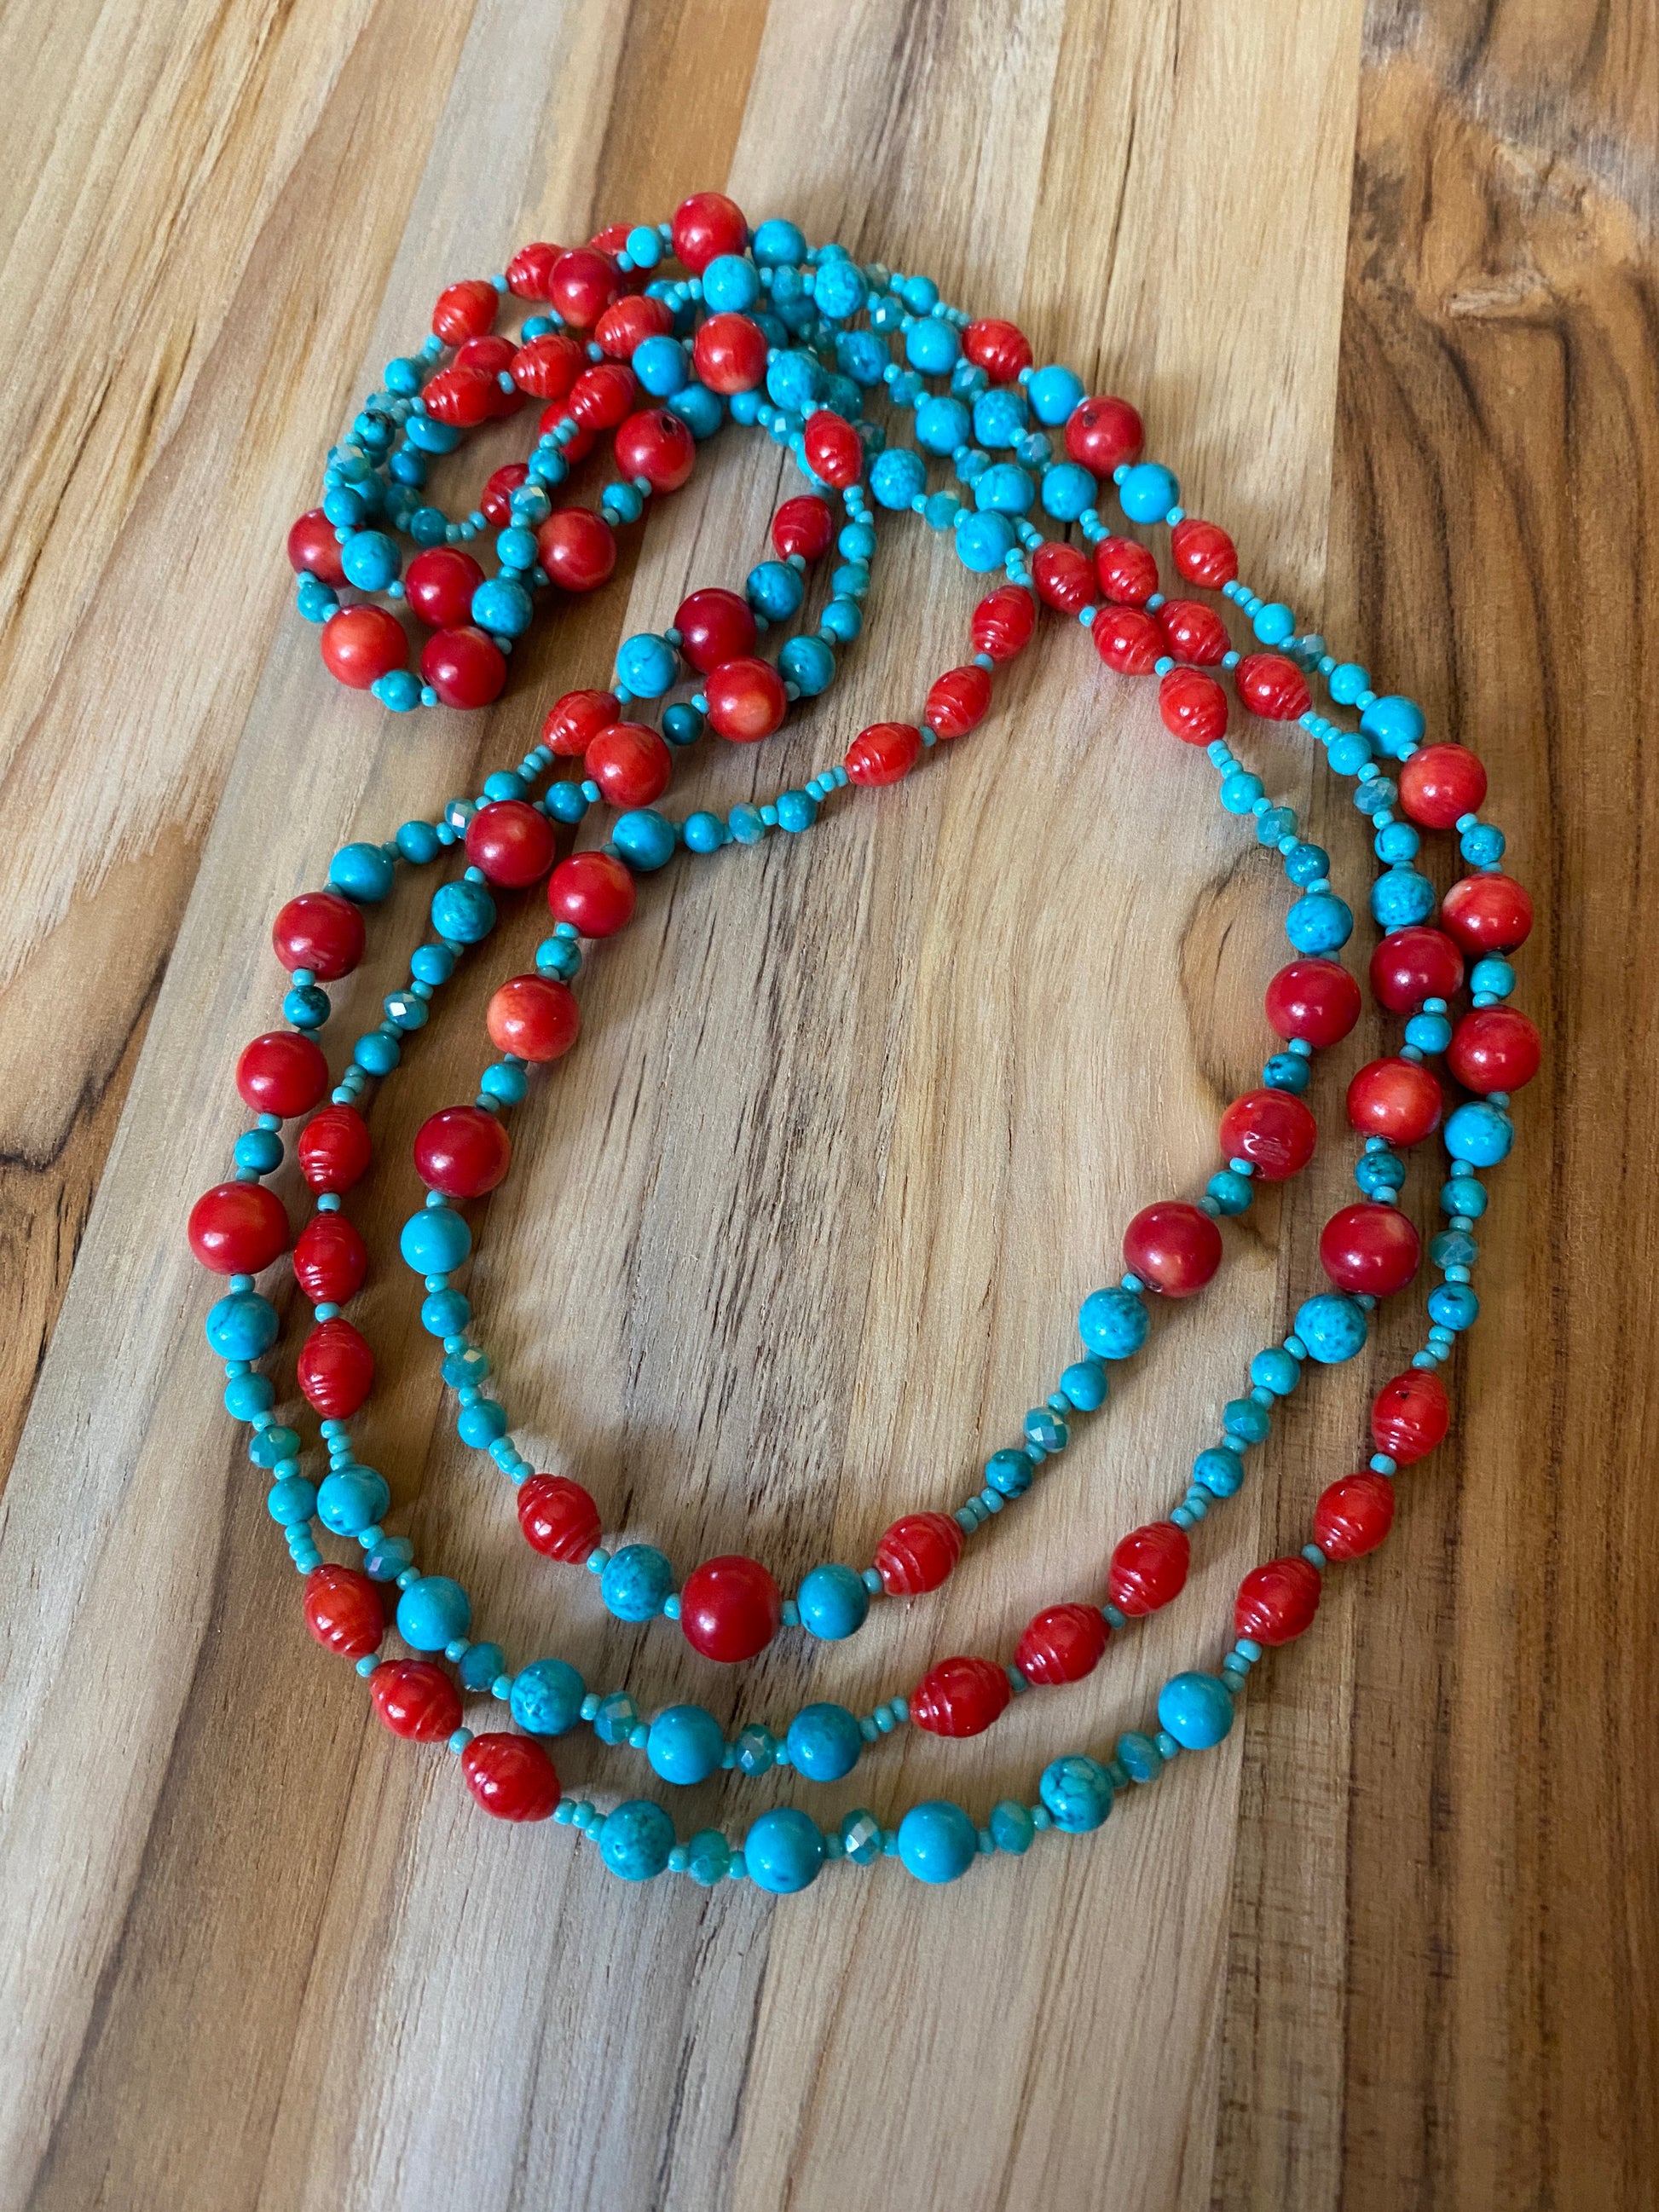 65" Long Southwestern Inspired Turquoise, Red & Crystal Beaded Necklace - My Urban Gems